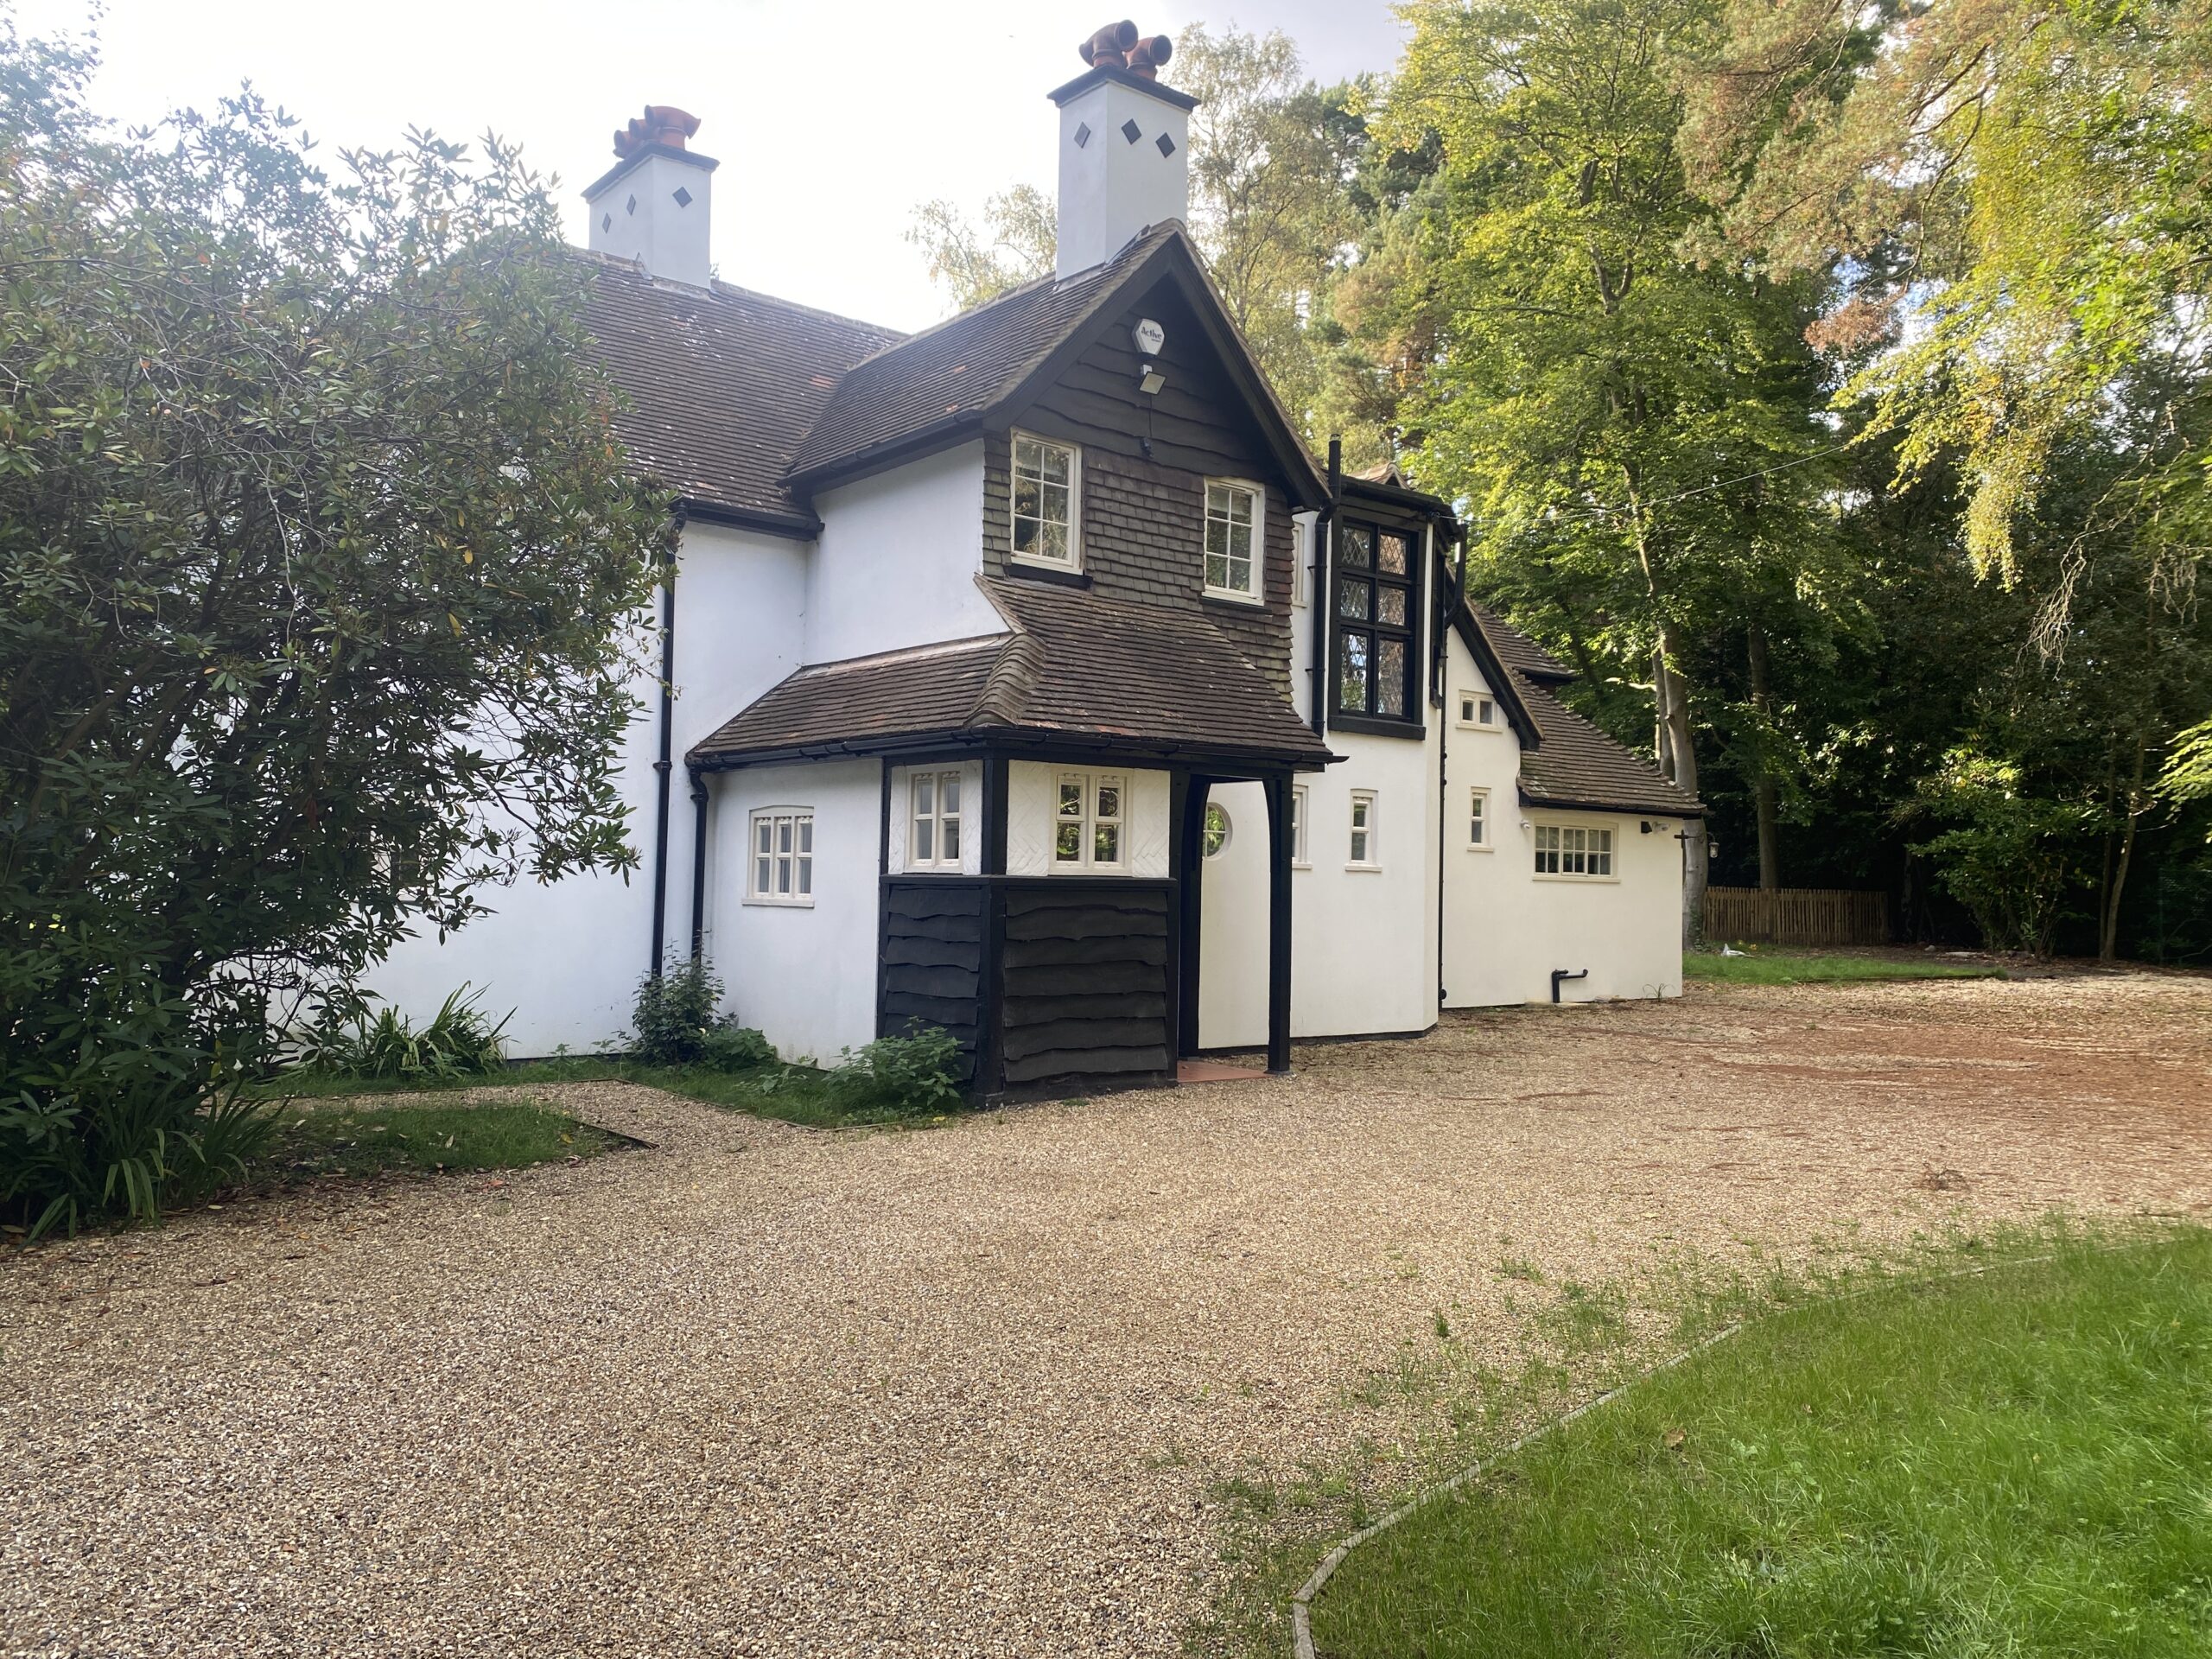 Front view of the house. Pinewood Lodge, Swinley Road, Ascot, SL5 8BA